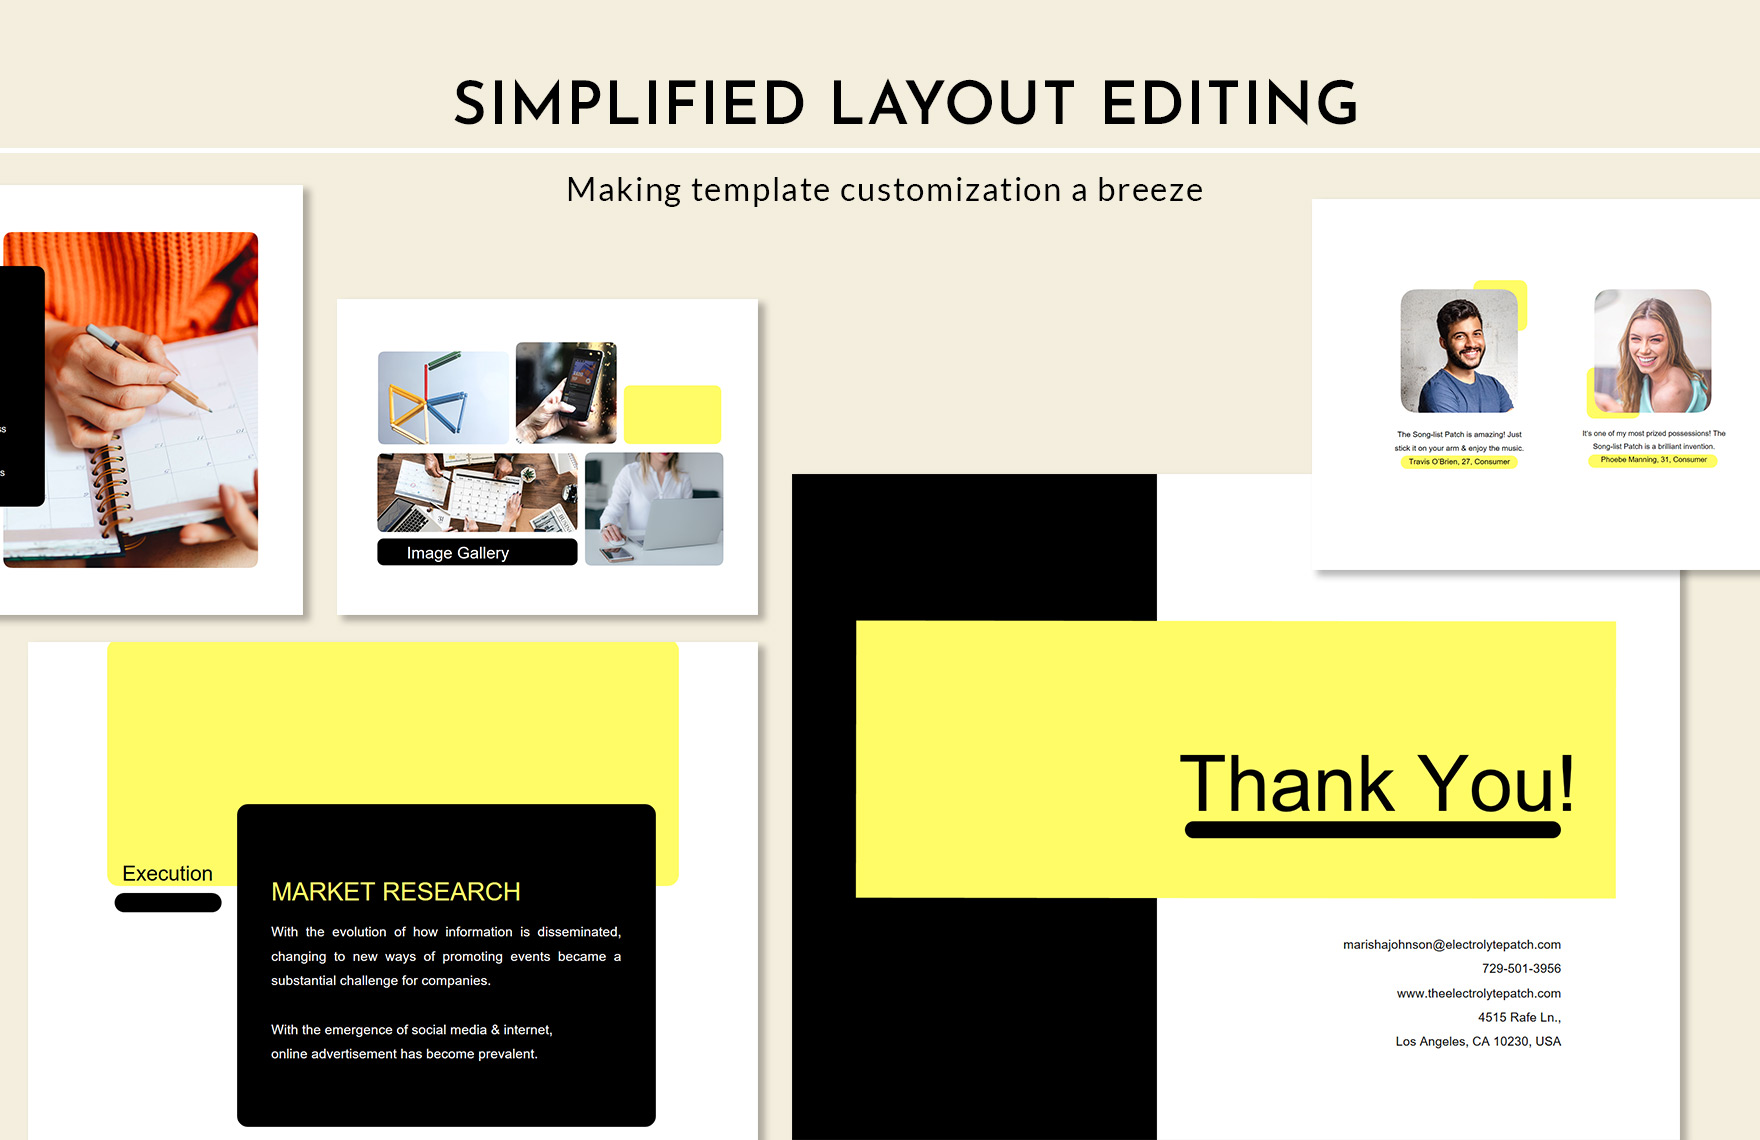 Business Pitch Deck Template